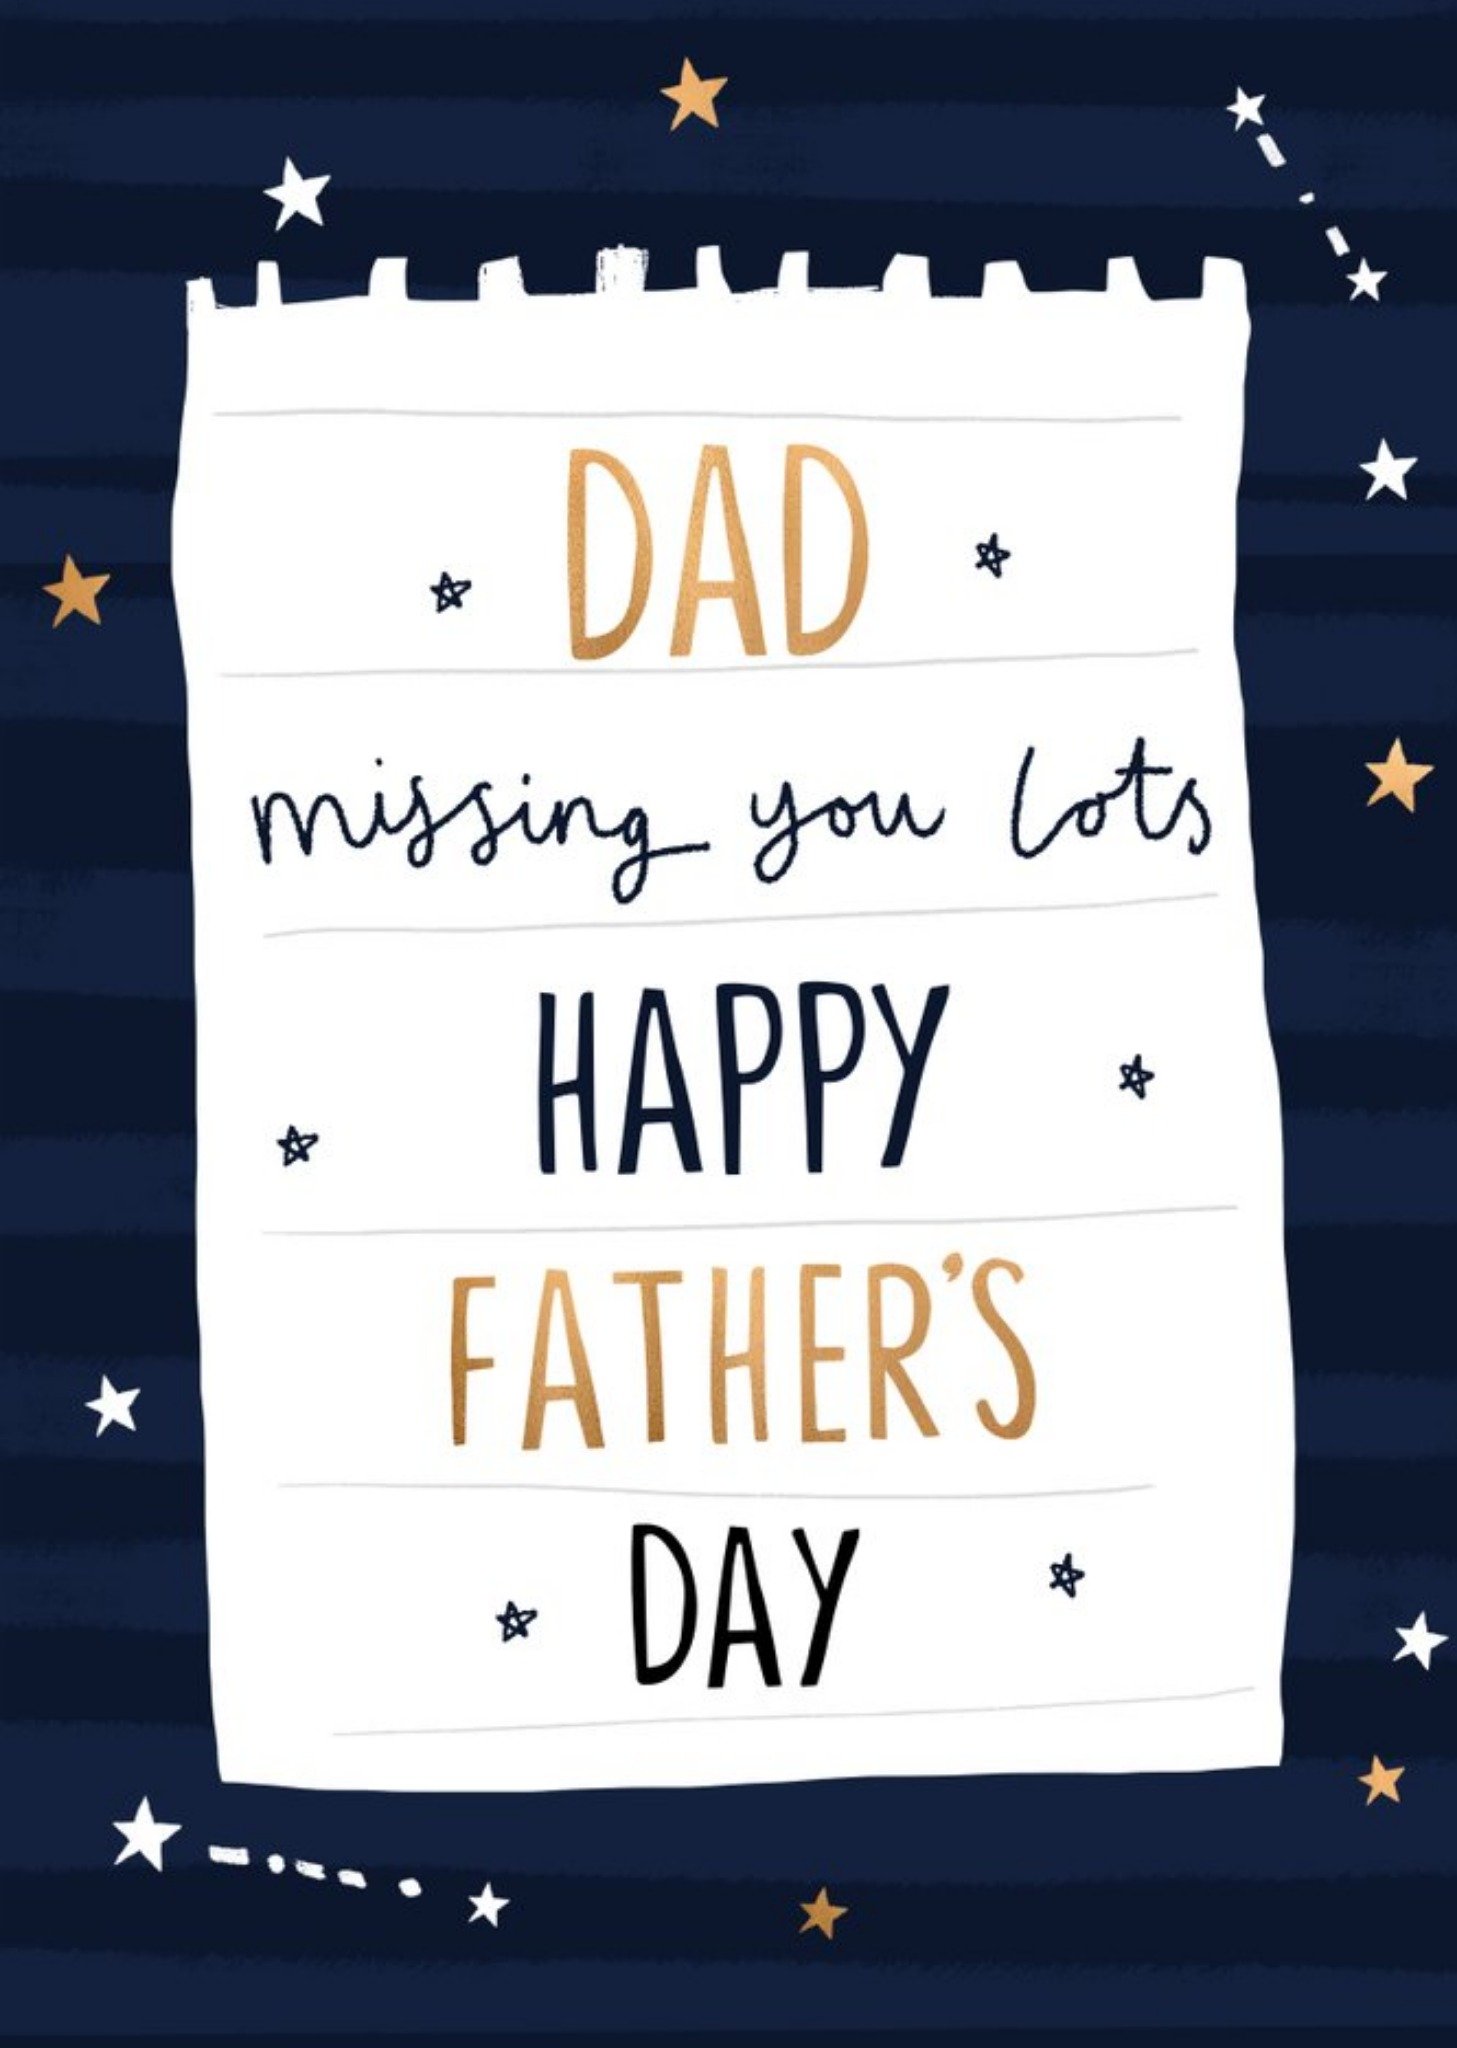 Moonpig Missing You Lots Father's Day Card Ecard